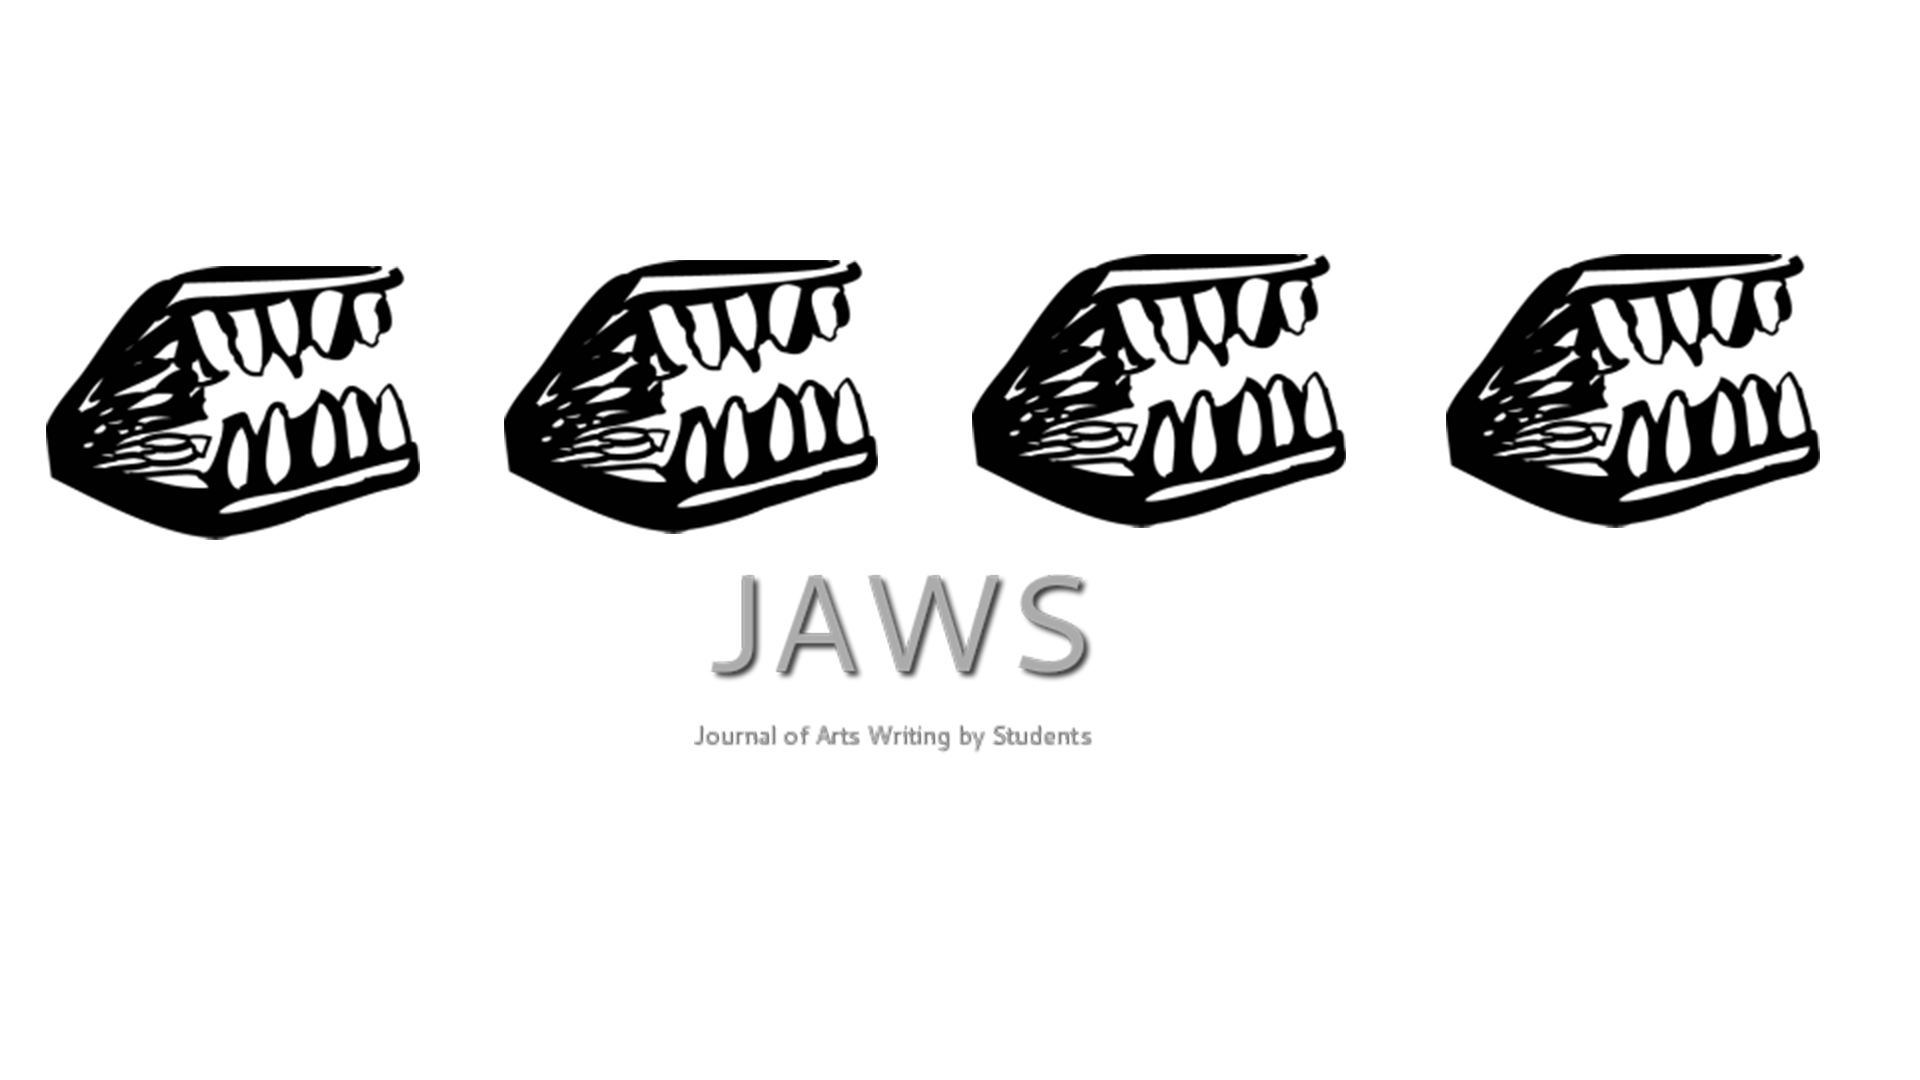 illustration of jaws - teeth and text JAWS